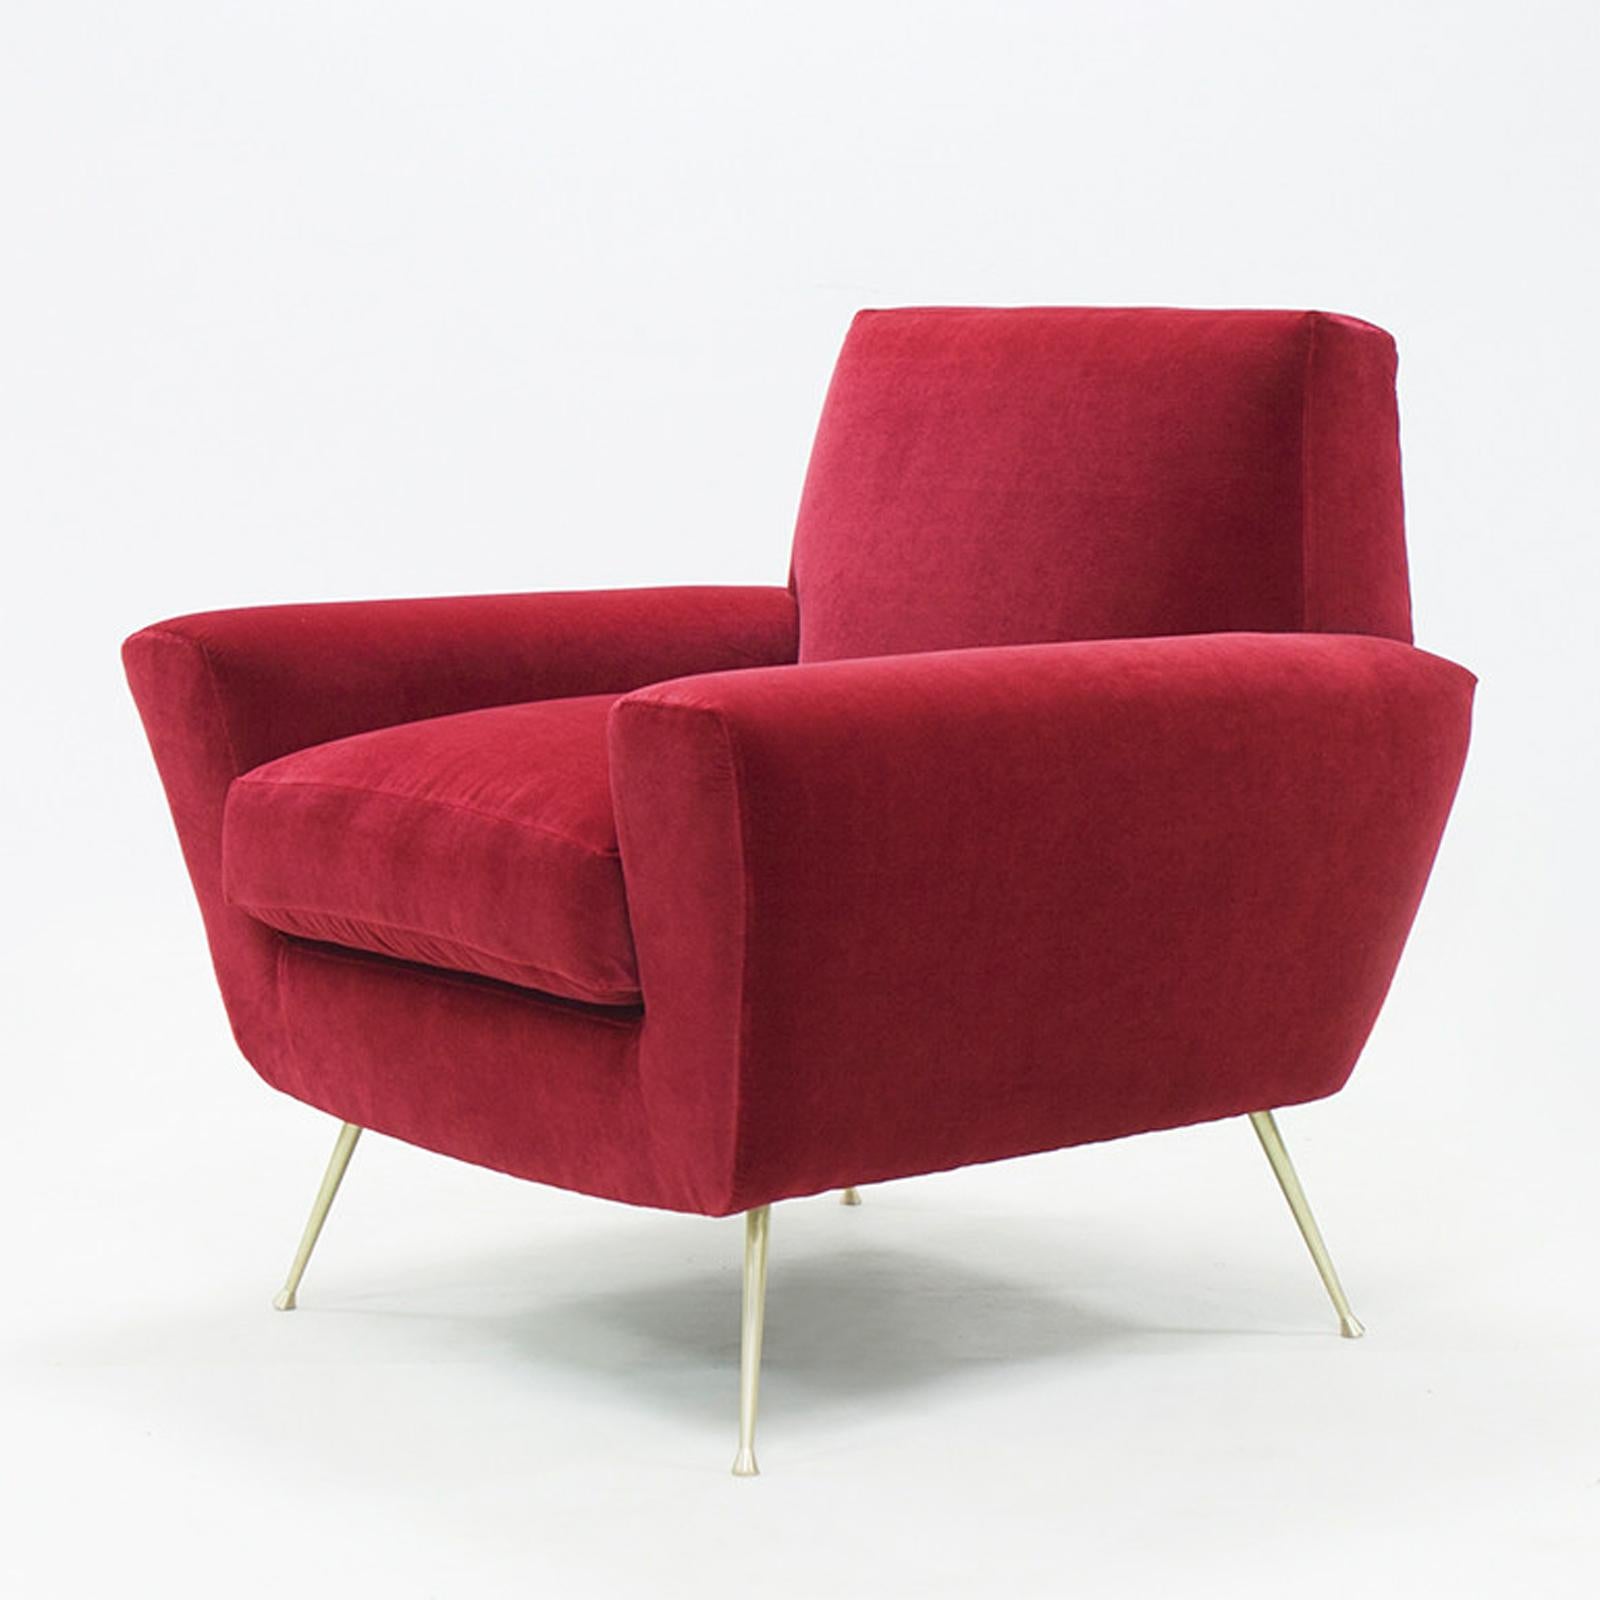 Armchair Ruby with structure in solid
wood. Upholstered and covered with 
high quality ruby velvet fabric.
Totally handmade piece.
Also available with other fabrics on request.